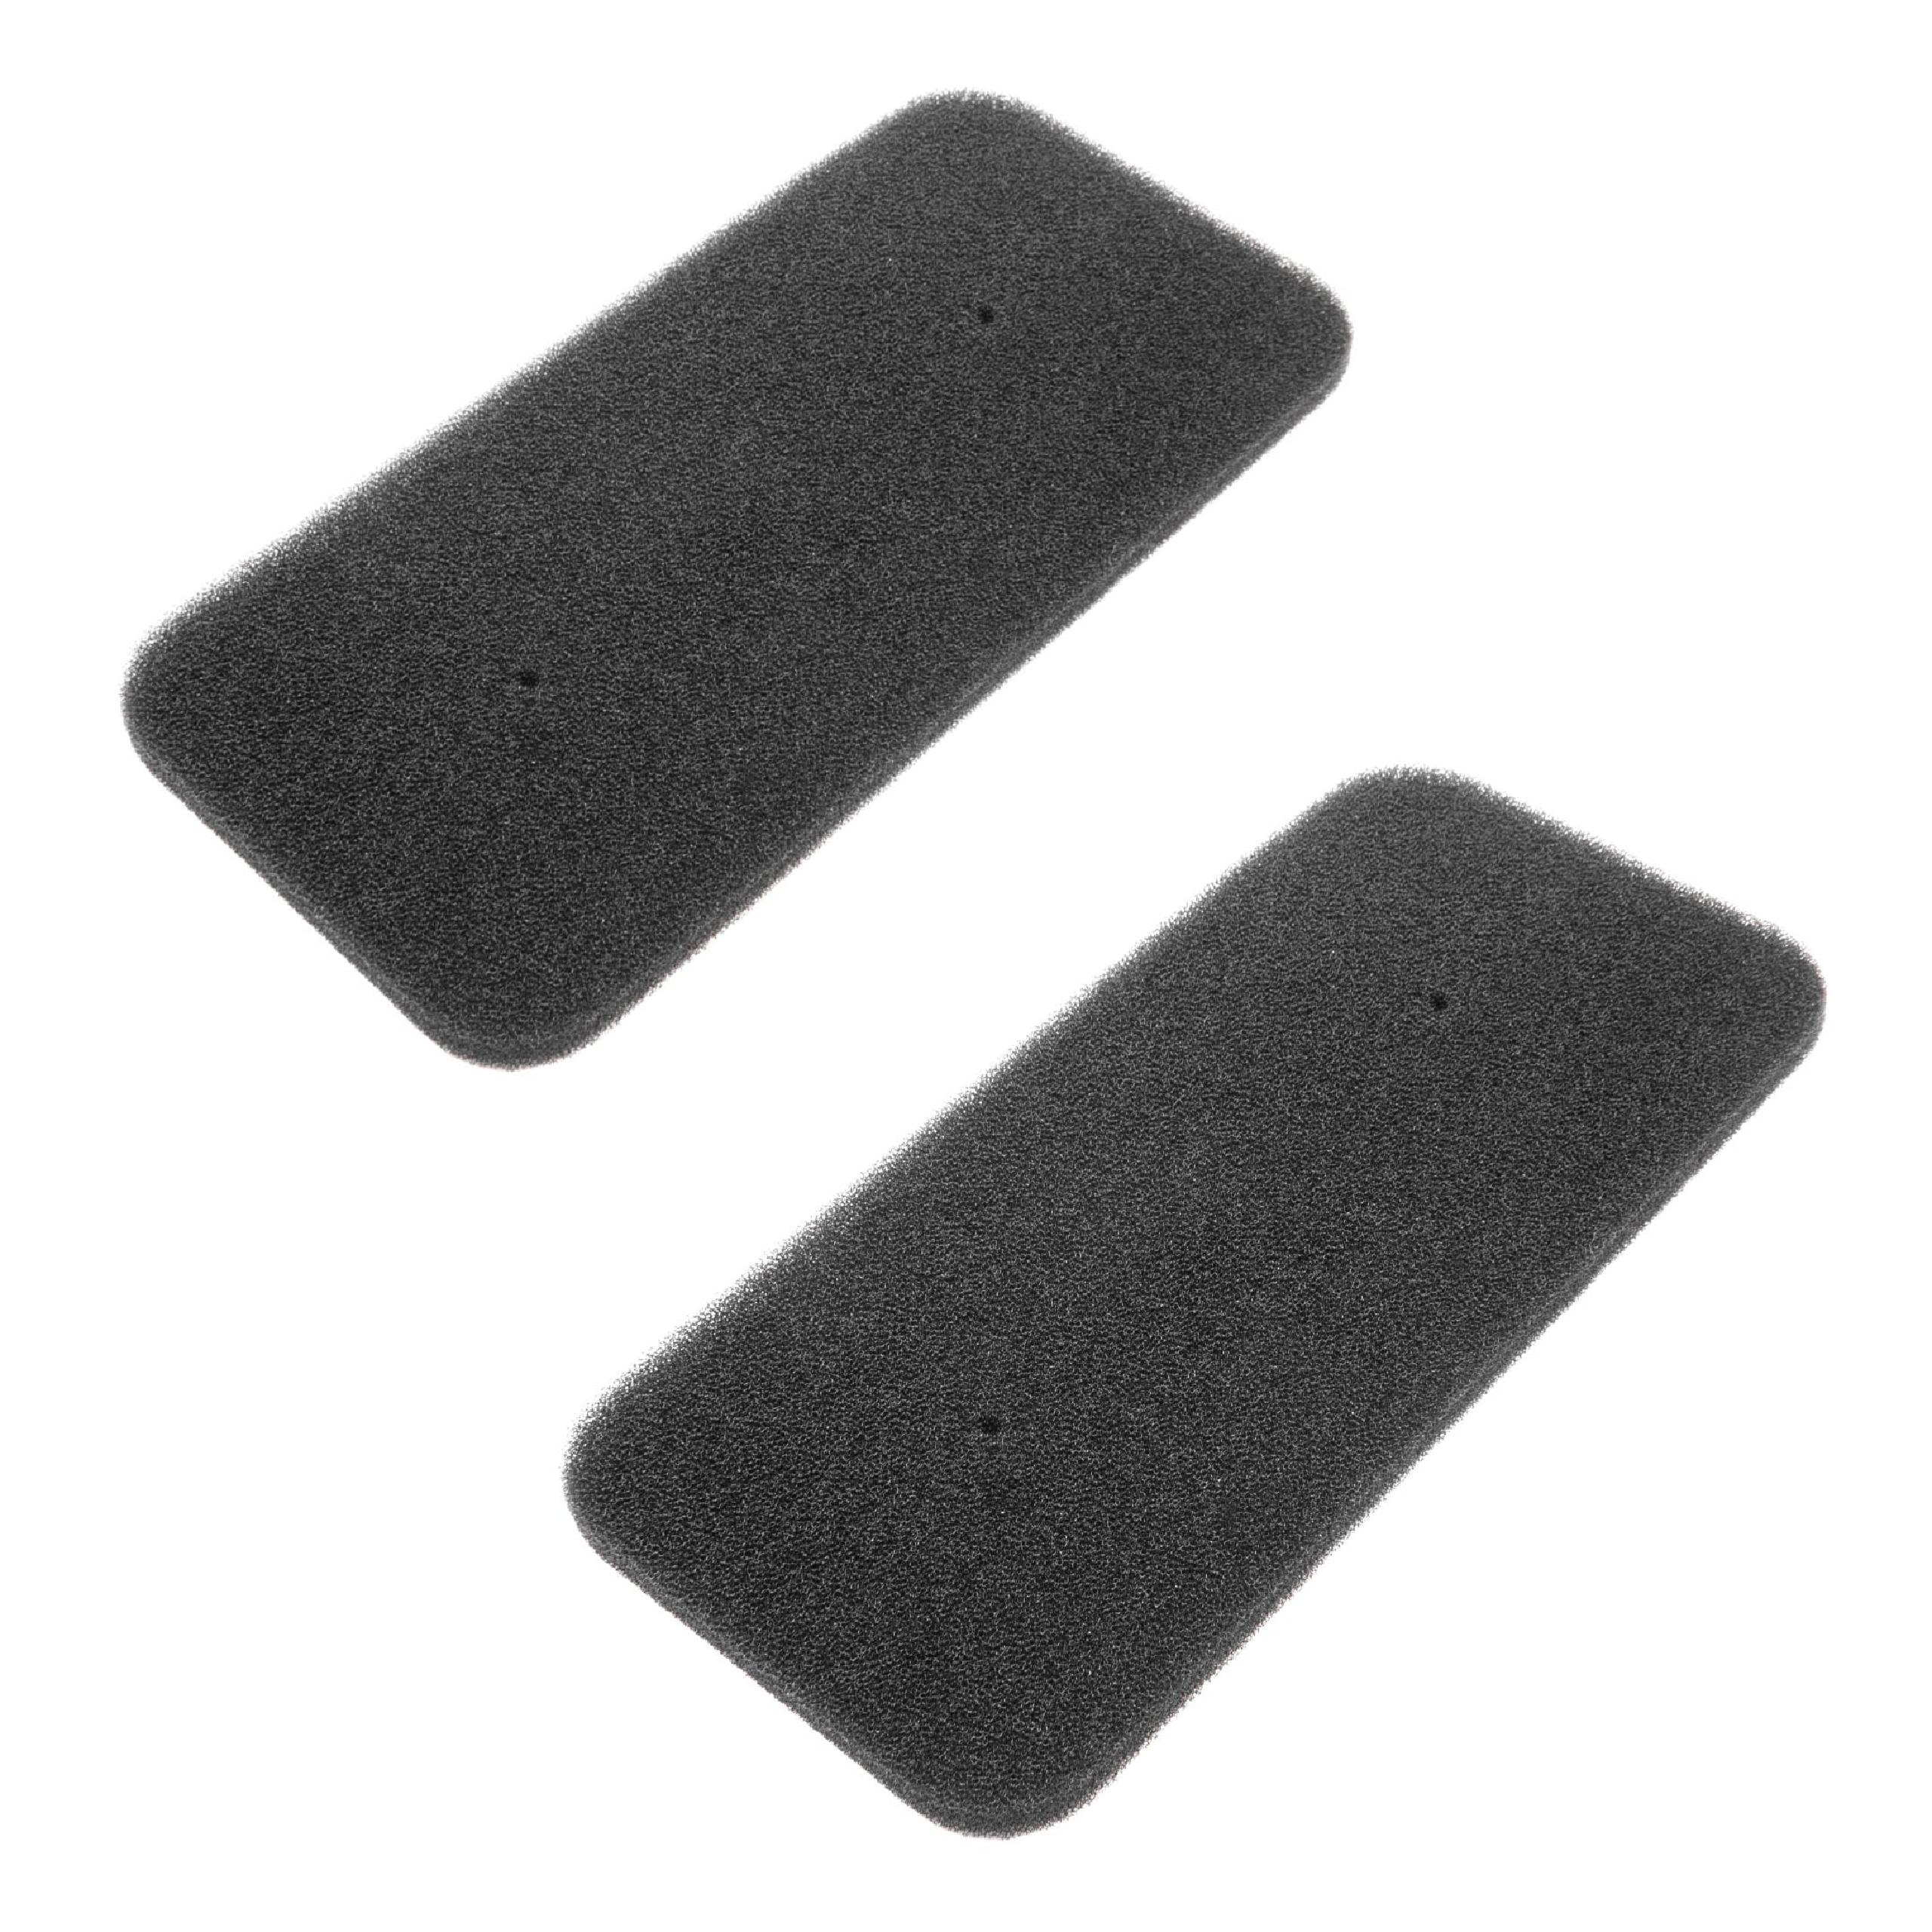 Filter Set (2x sponge filter) as Replacement for Candy 40006731 Tumble Dryer etc.